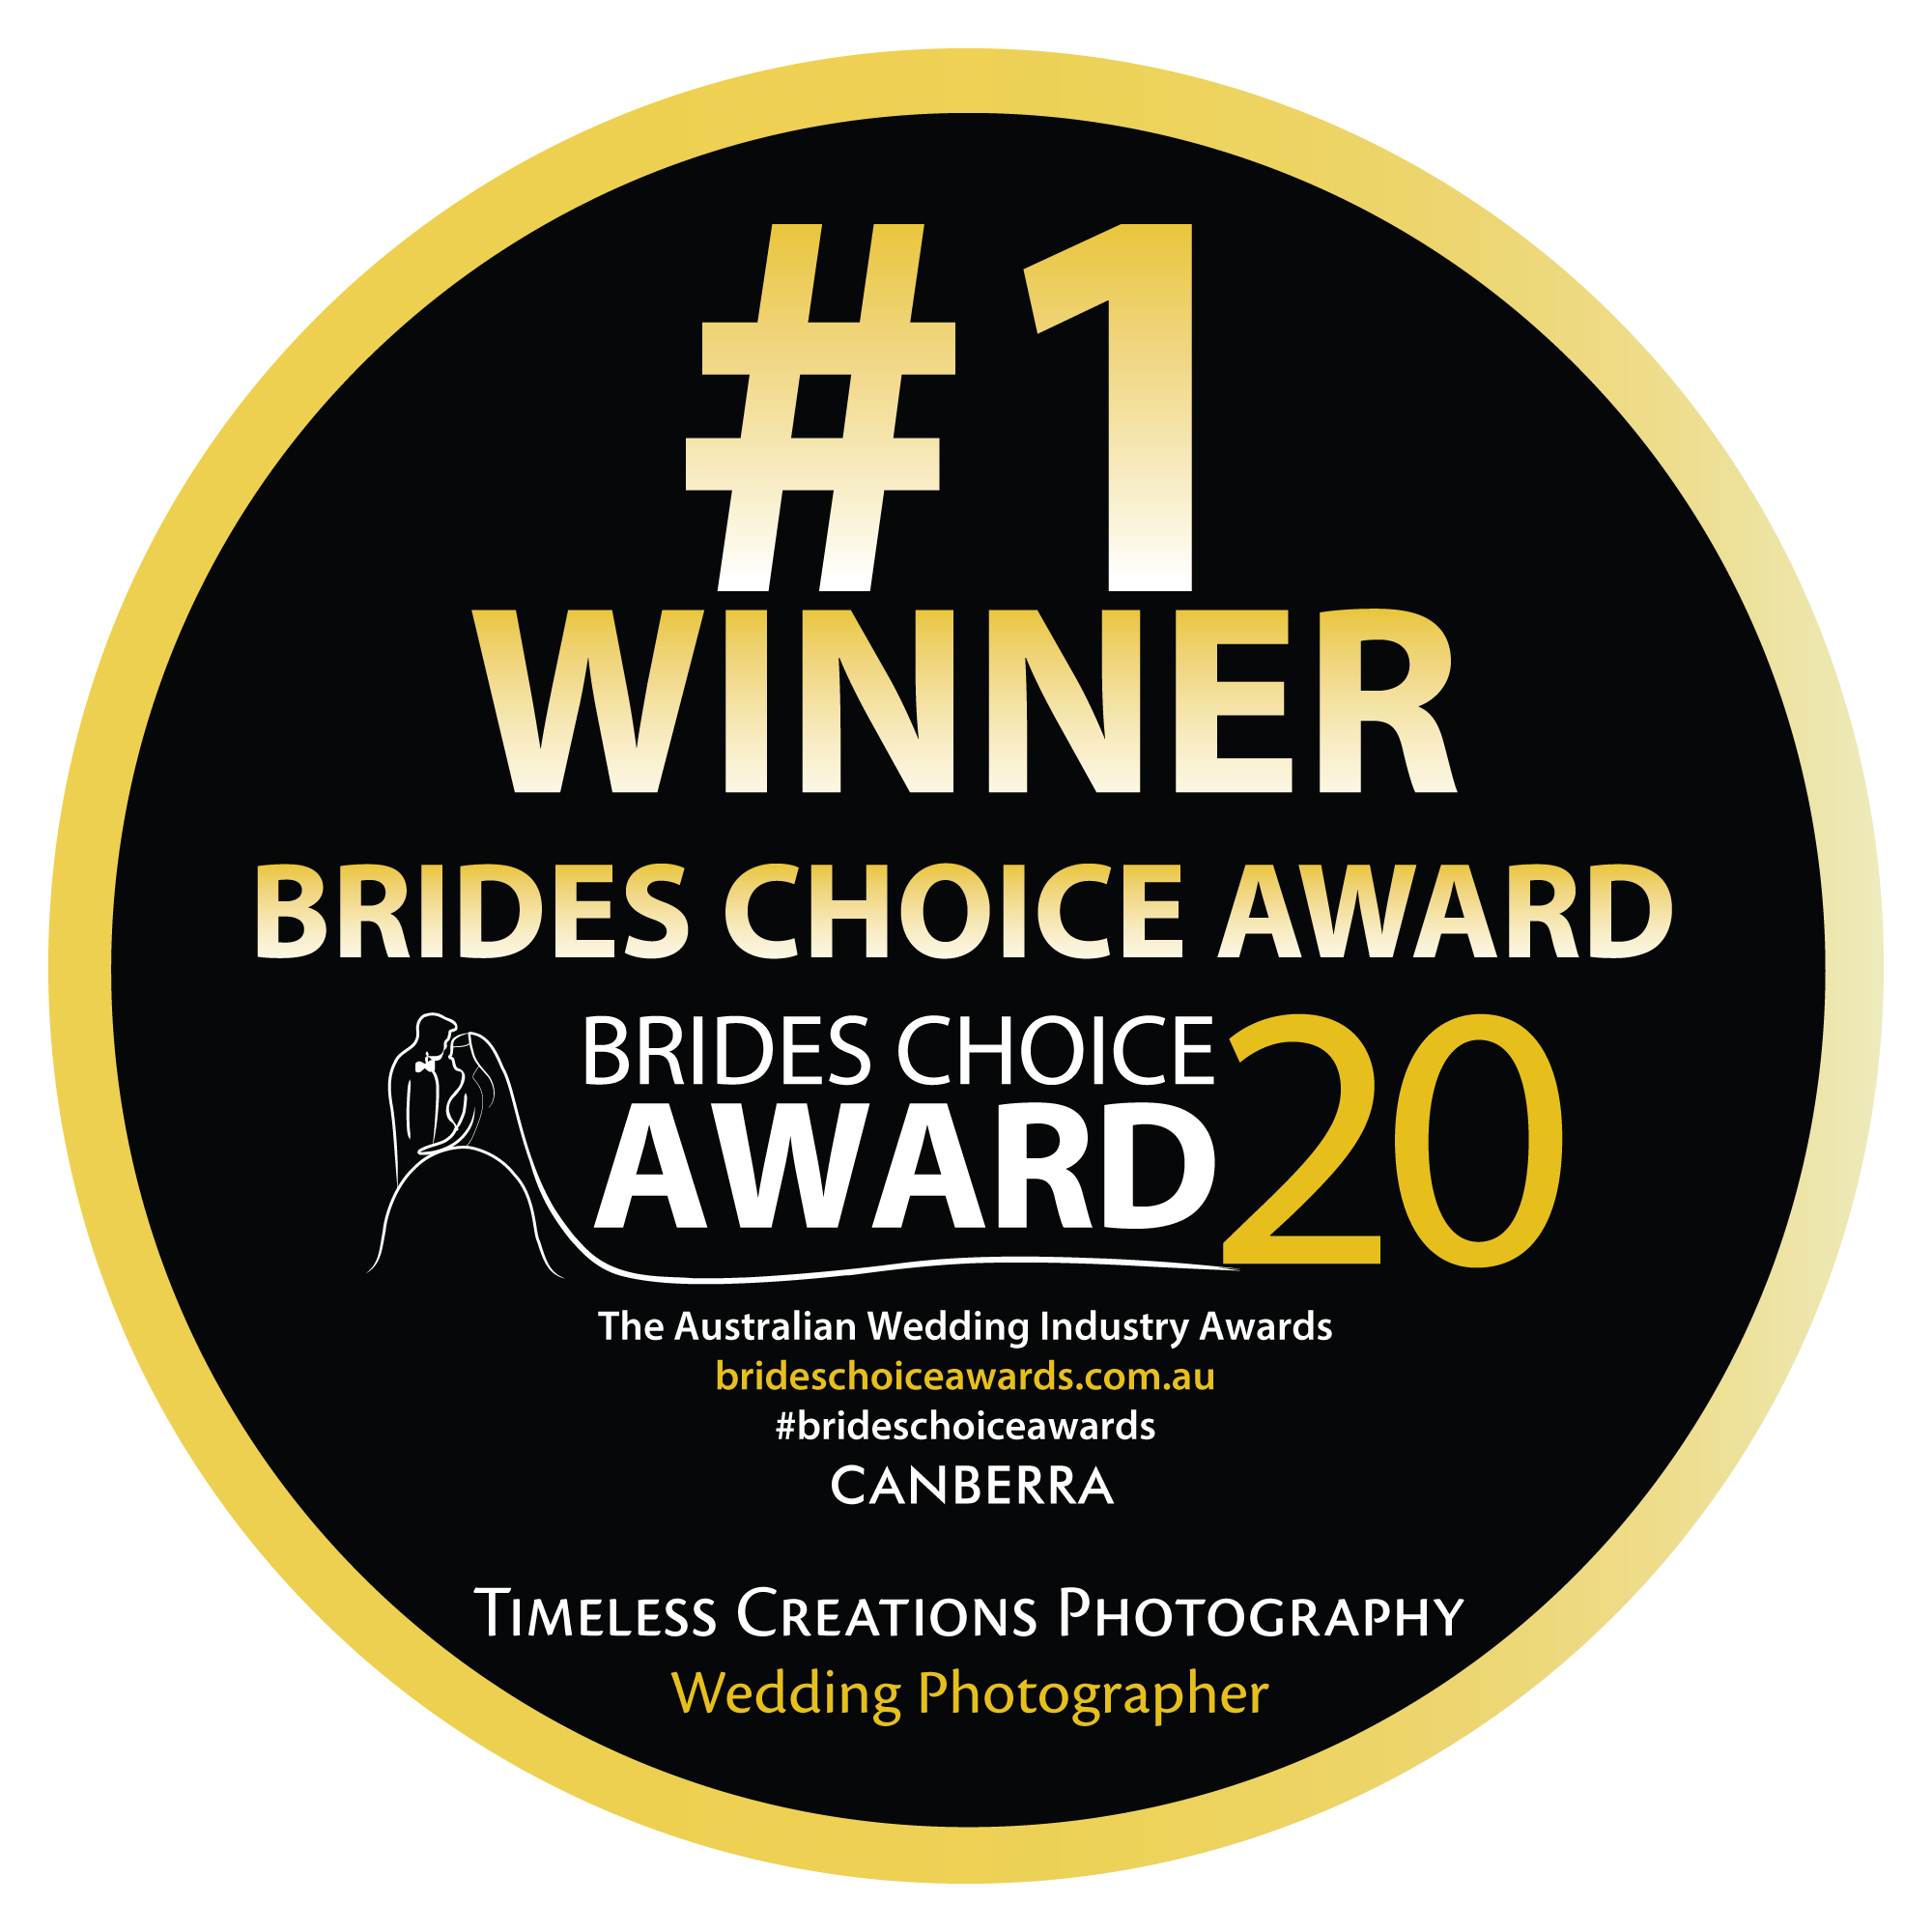 Timeless-Creations-Photography-CAN-roundel-1WINNER-2020.png